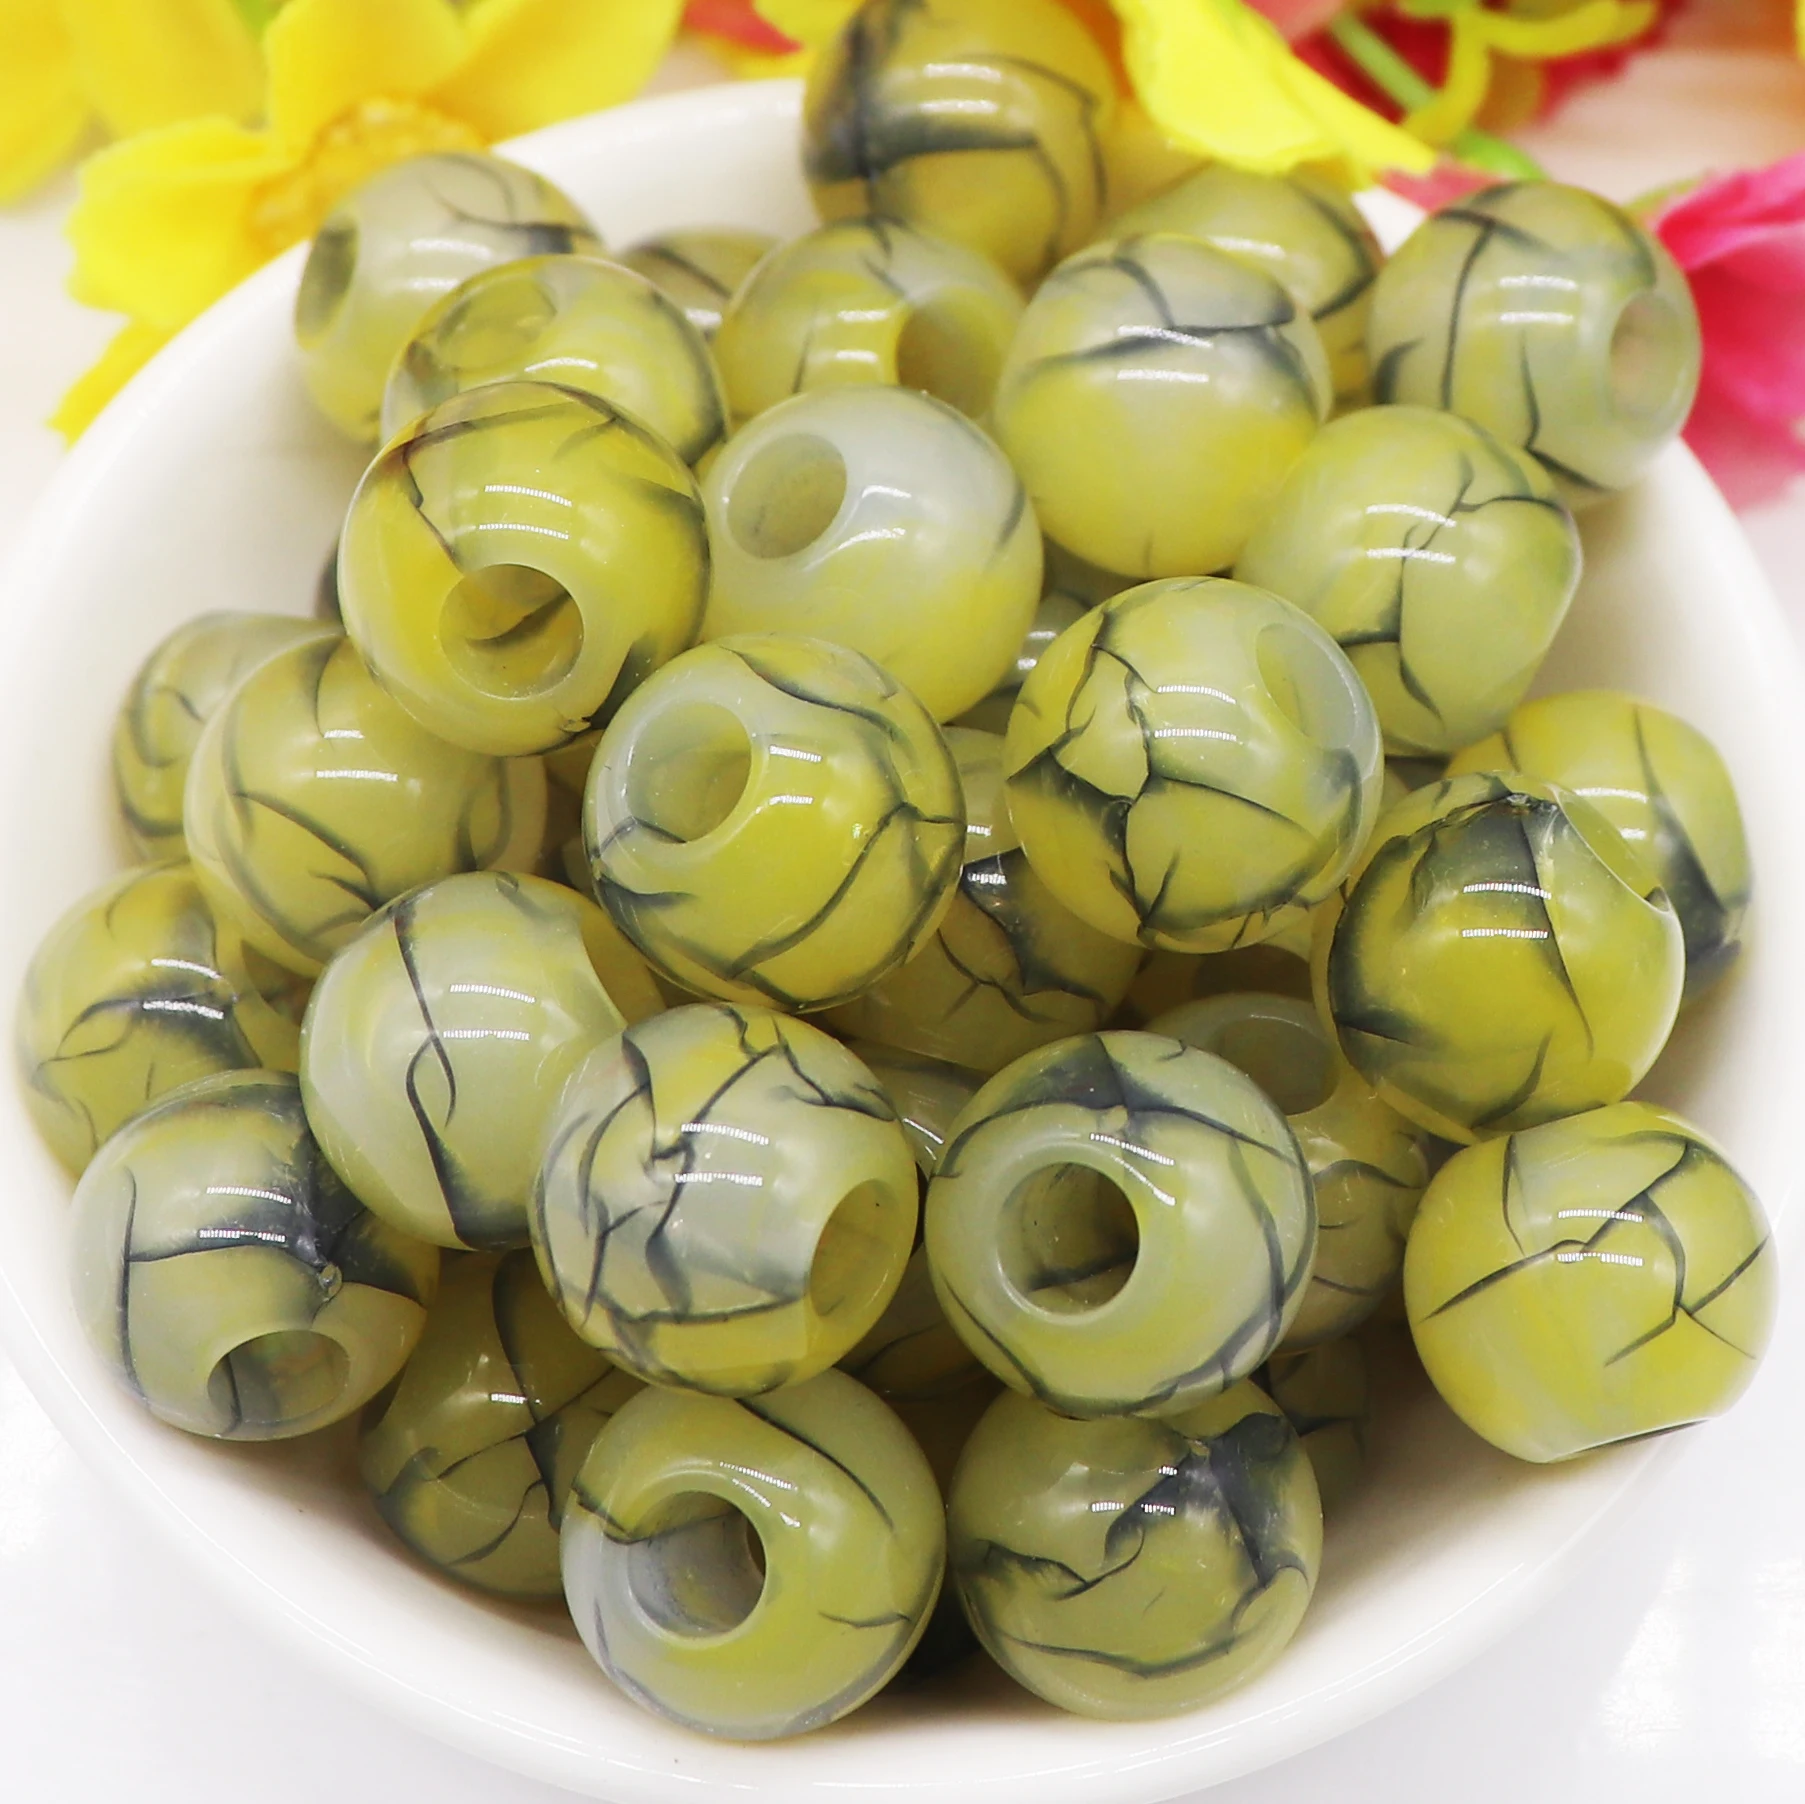 

10Pcs Yellow Stripe Color Assorted 14mm Round Loose Spacer Charms European Craft Beads for Bracelet Women Girls DIY Jewelry Gift